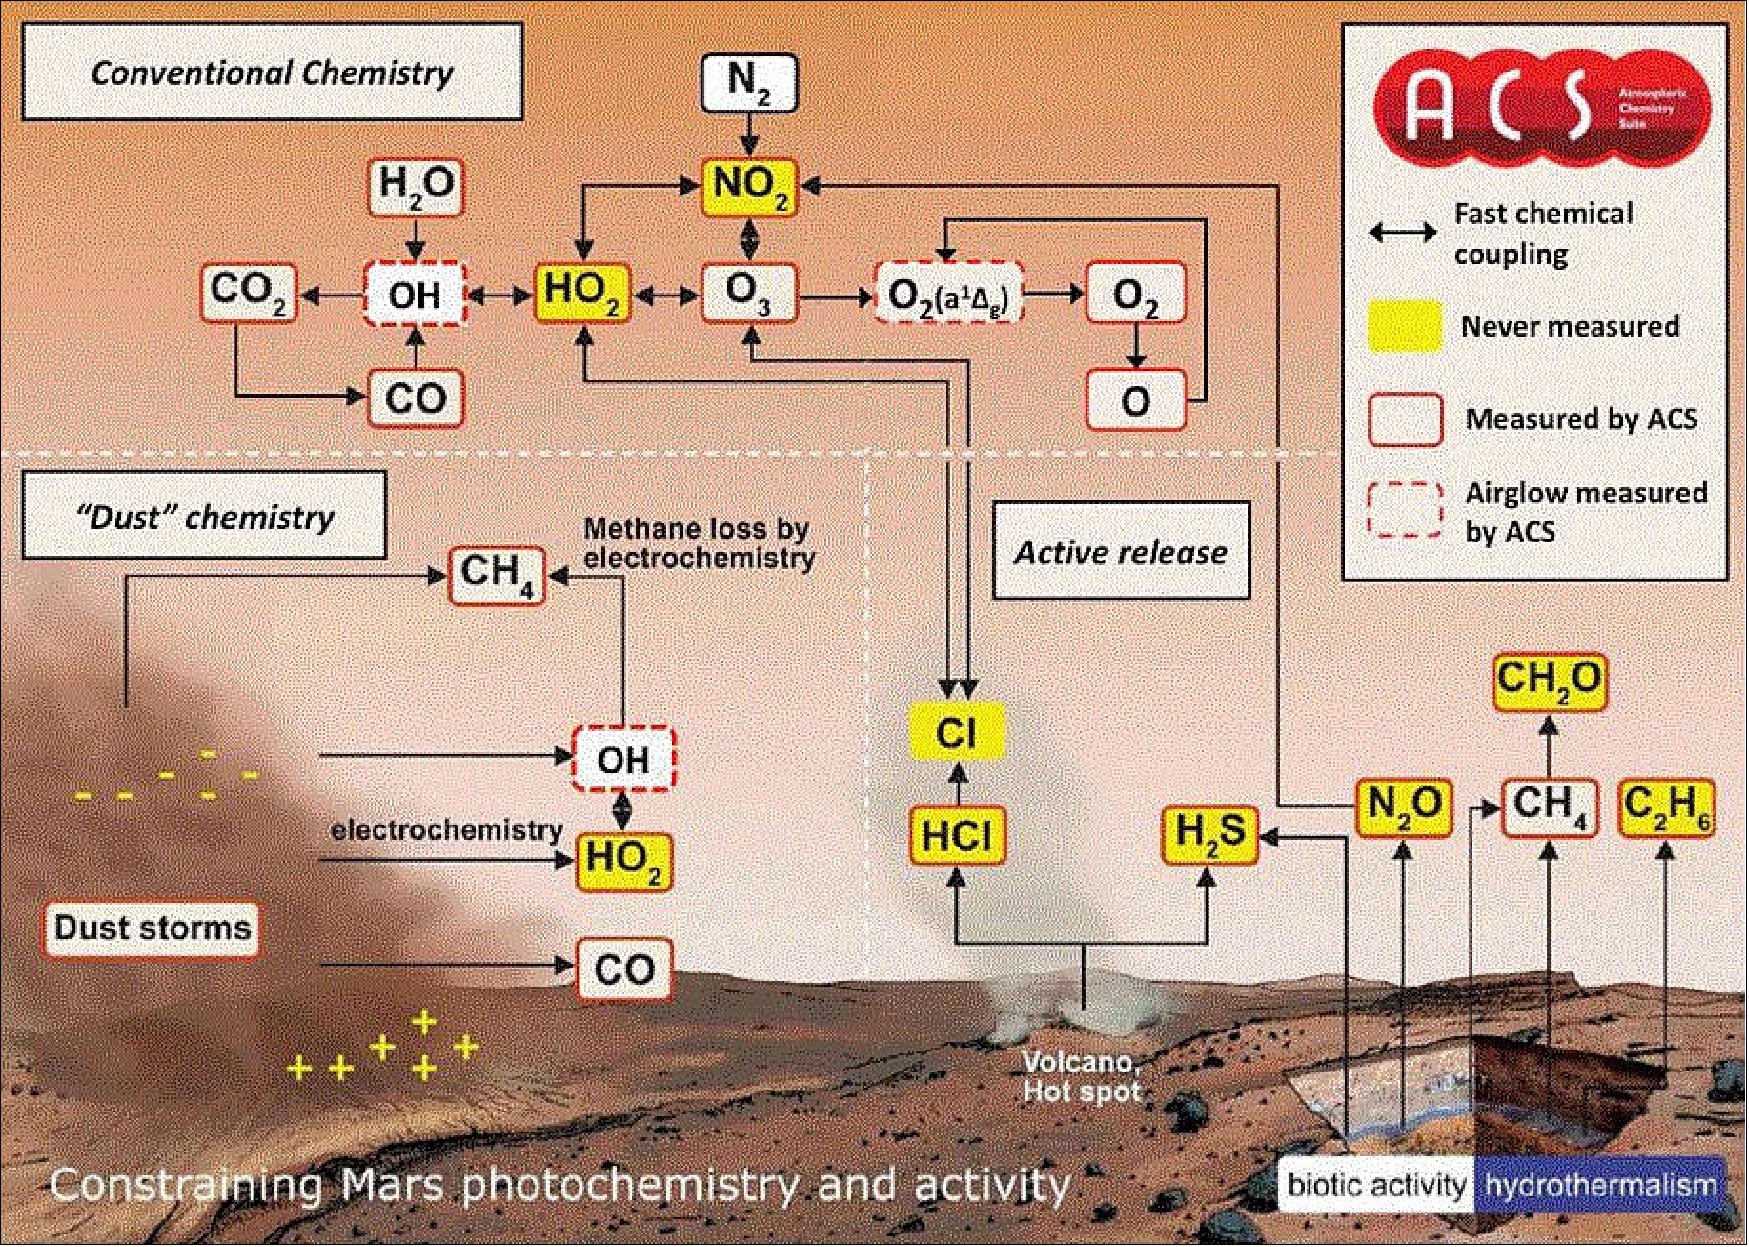 Figure 99: The main photochemical pathways known or expected to occur on Mars and their relation to ACS measurement capabilities (image credit: IKI, MIPT, Research Team)